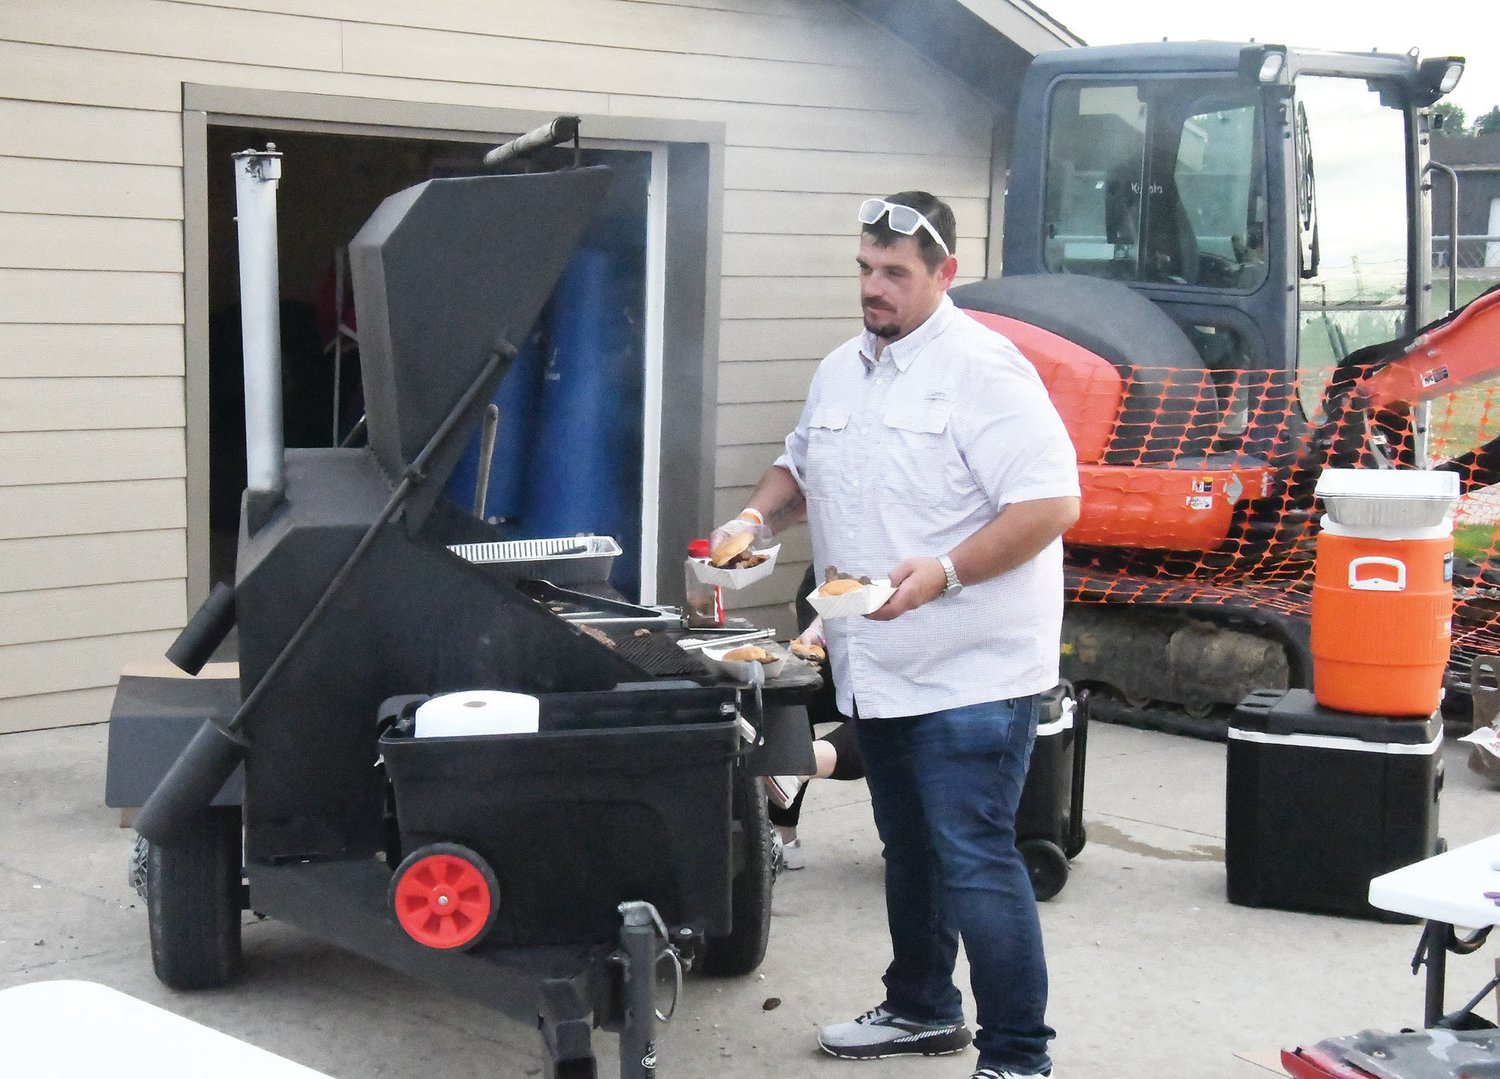 Denny Price manned the grill, with the Fraternal Order of Eagles of Moberly providing meal deals for the fans.